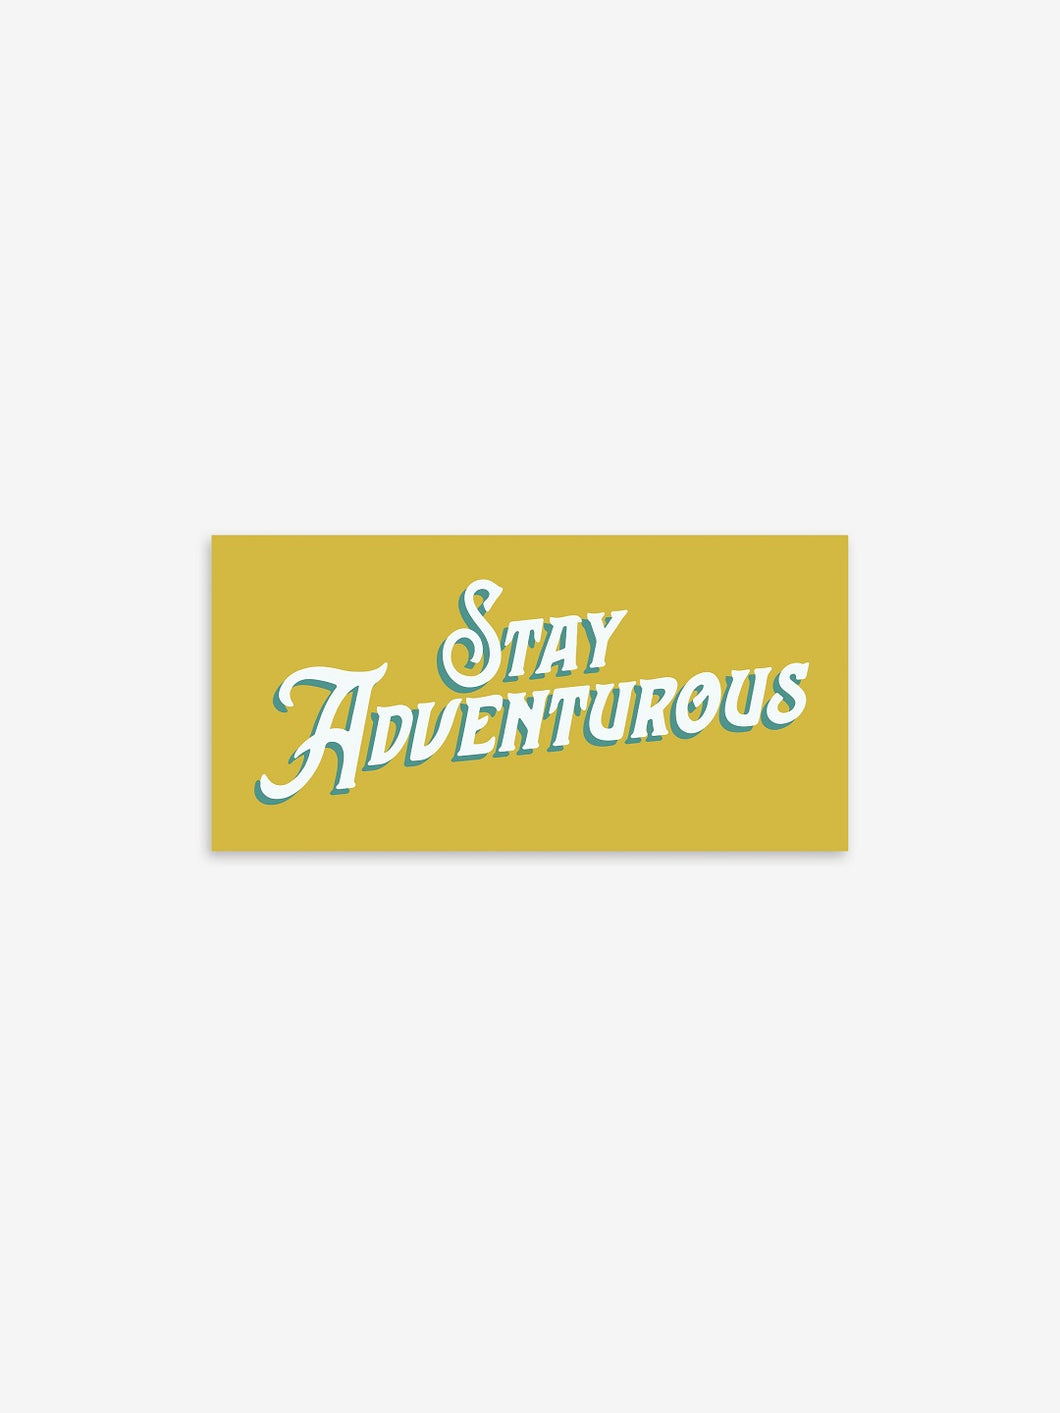 Pictured is a yellow rectangular sticker with the words Stay Adventurous in white and shadowed in teal. Perfect to show your passion for outdoor roof top tent camping! Available for sale by SMRT Tent in Denver, Colorado, USA.